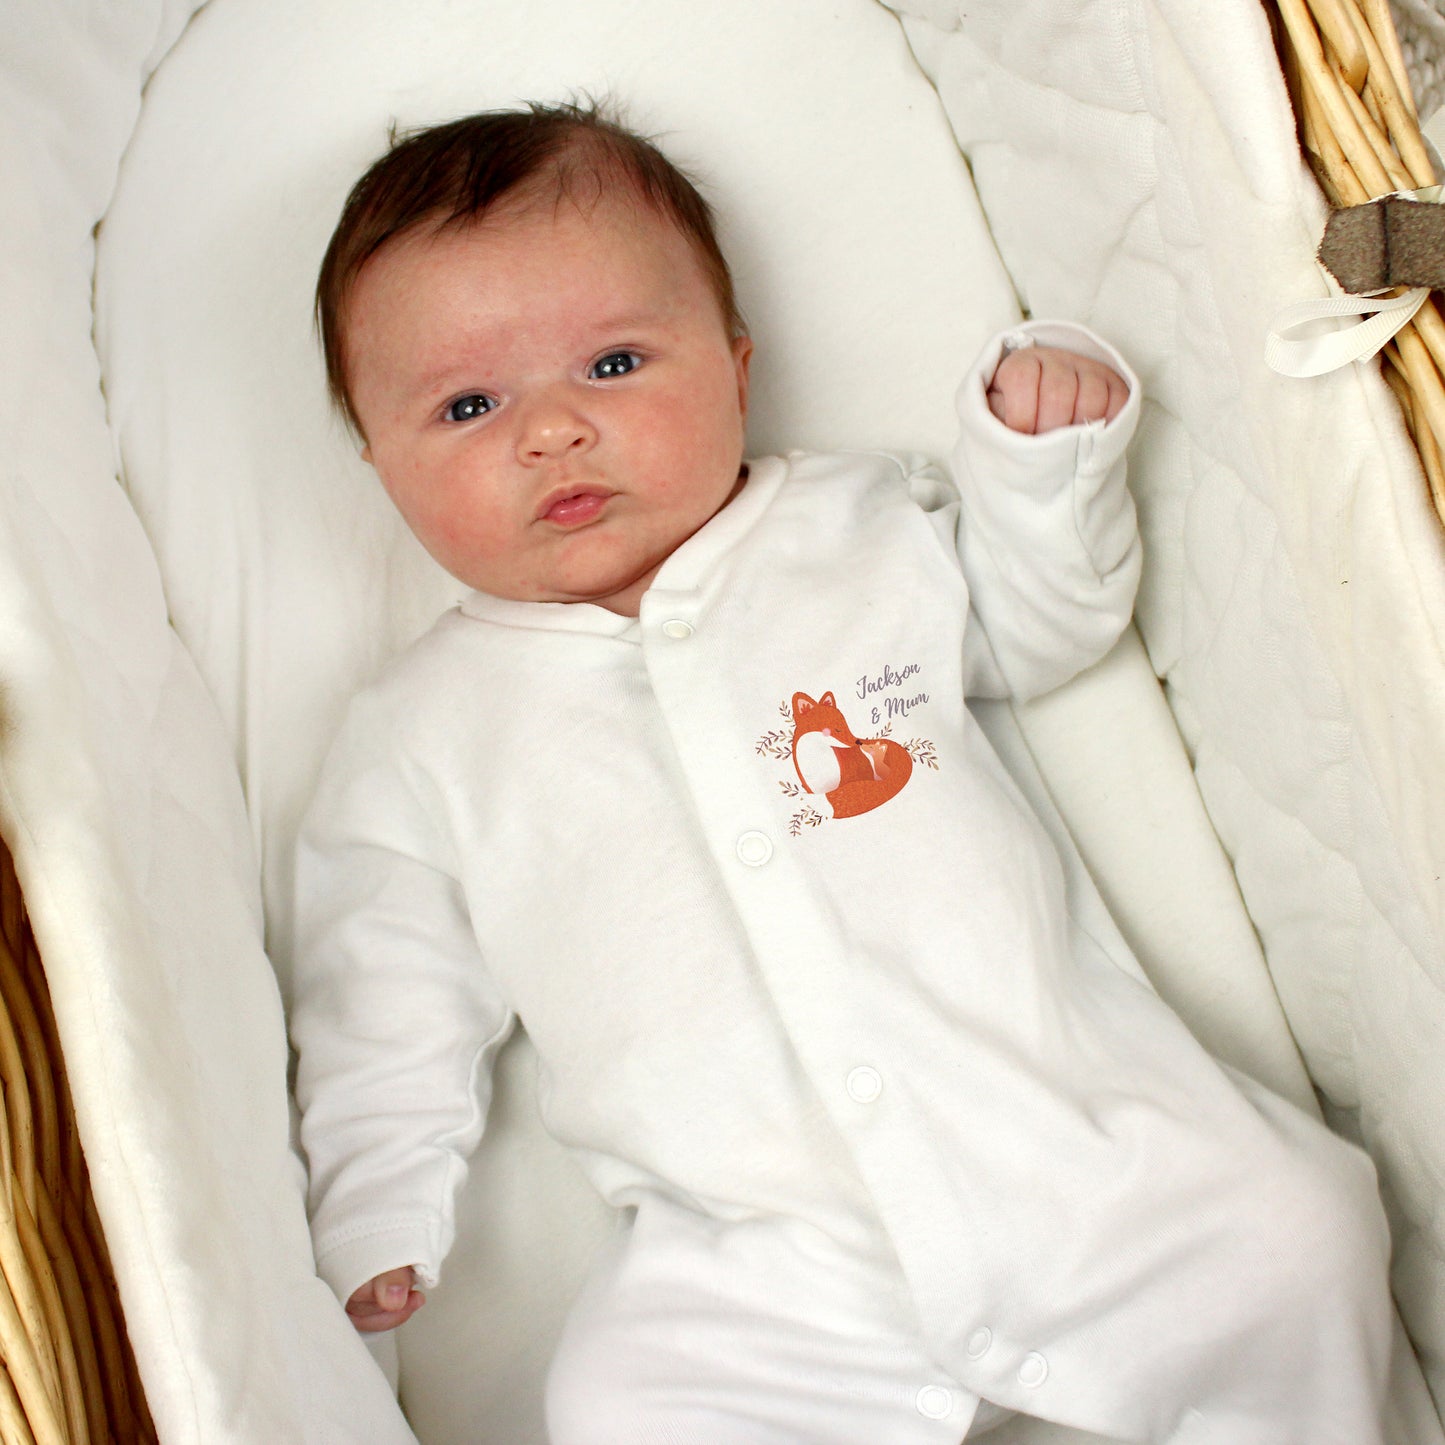 Personalised Babygrow 0-3 Months - Mummy & Me - Violet Belle Gifts - Personalised Babygrow 0-3 Months - Mummy & Me